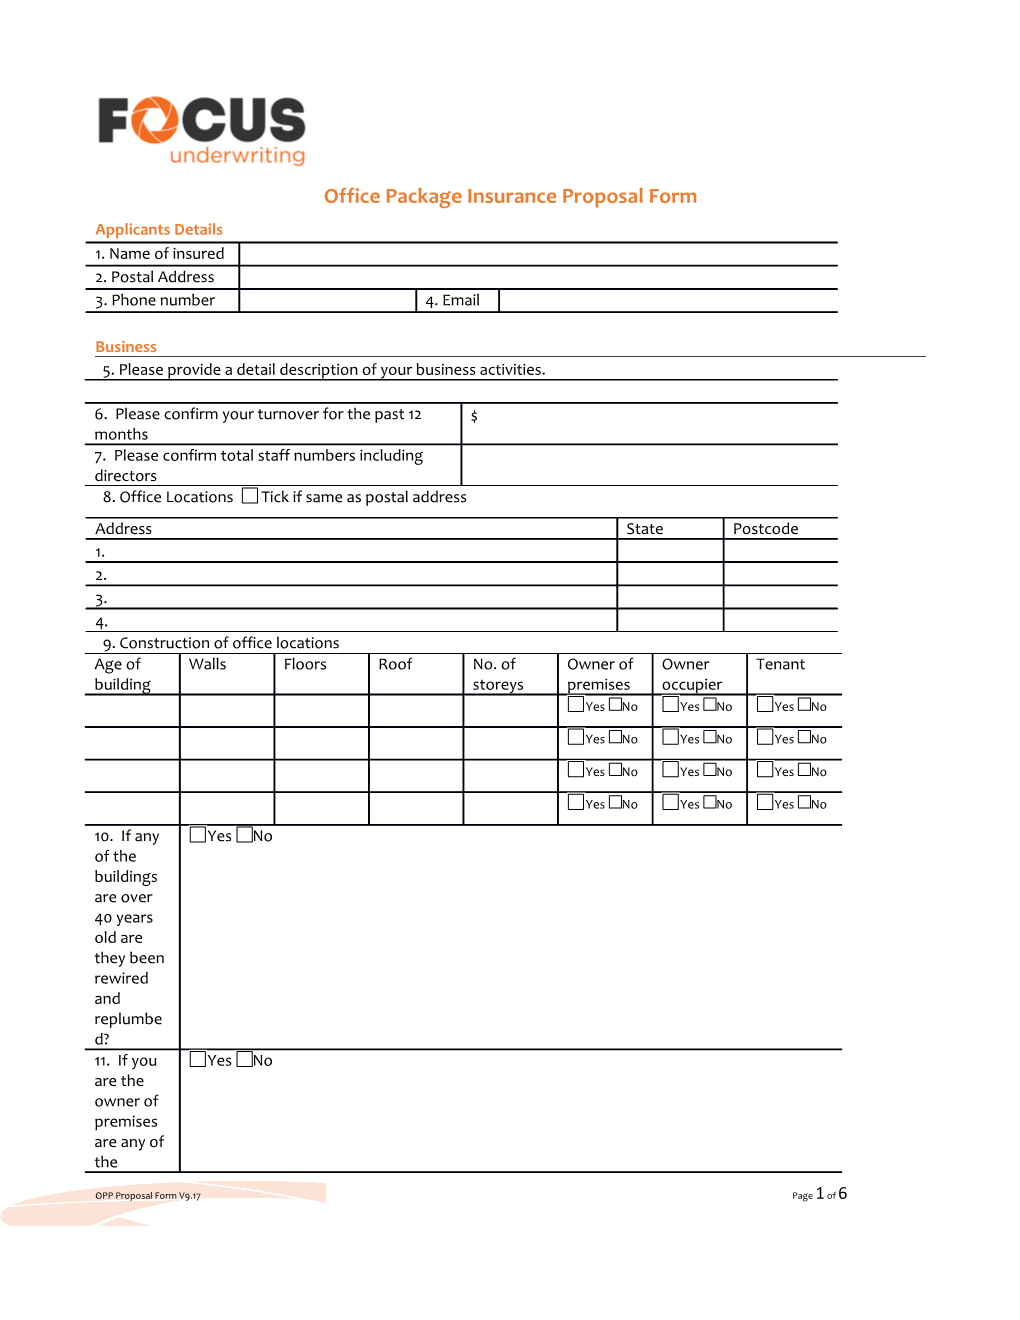 Office Packageinsurance Proposal Form